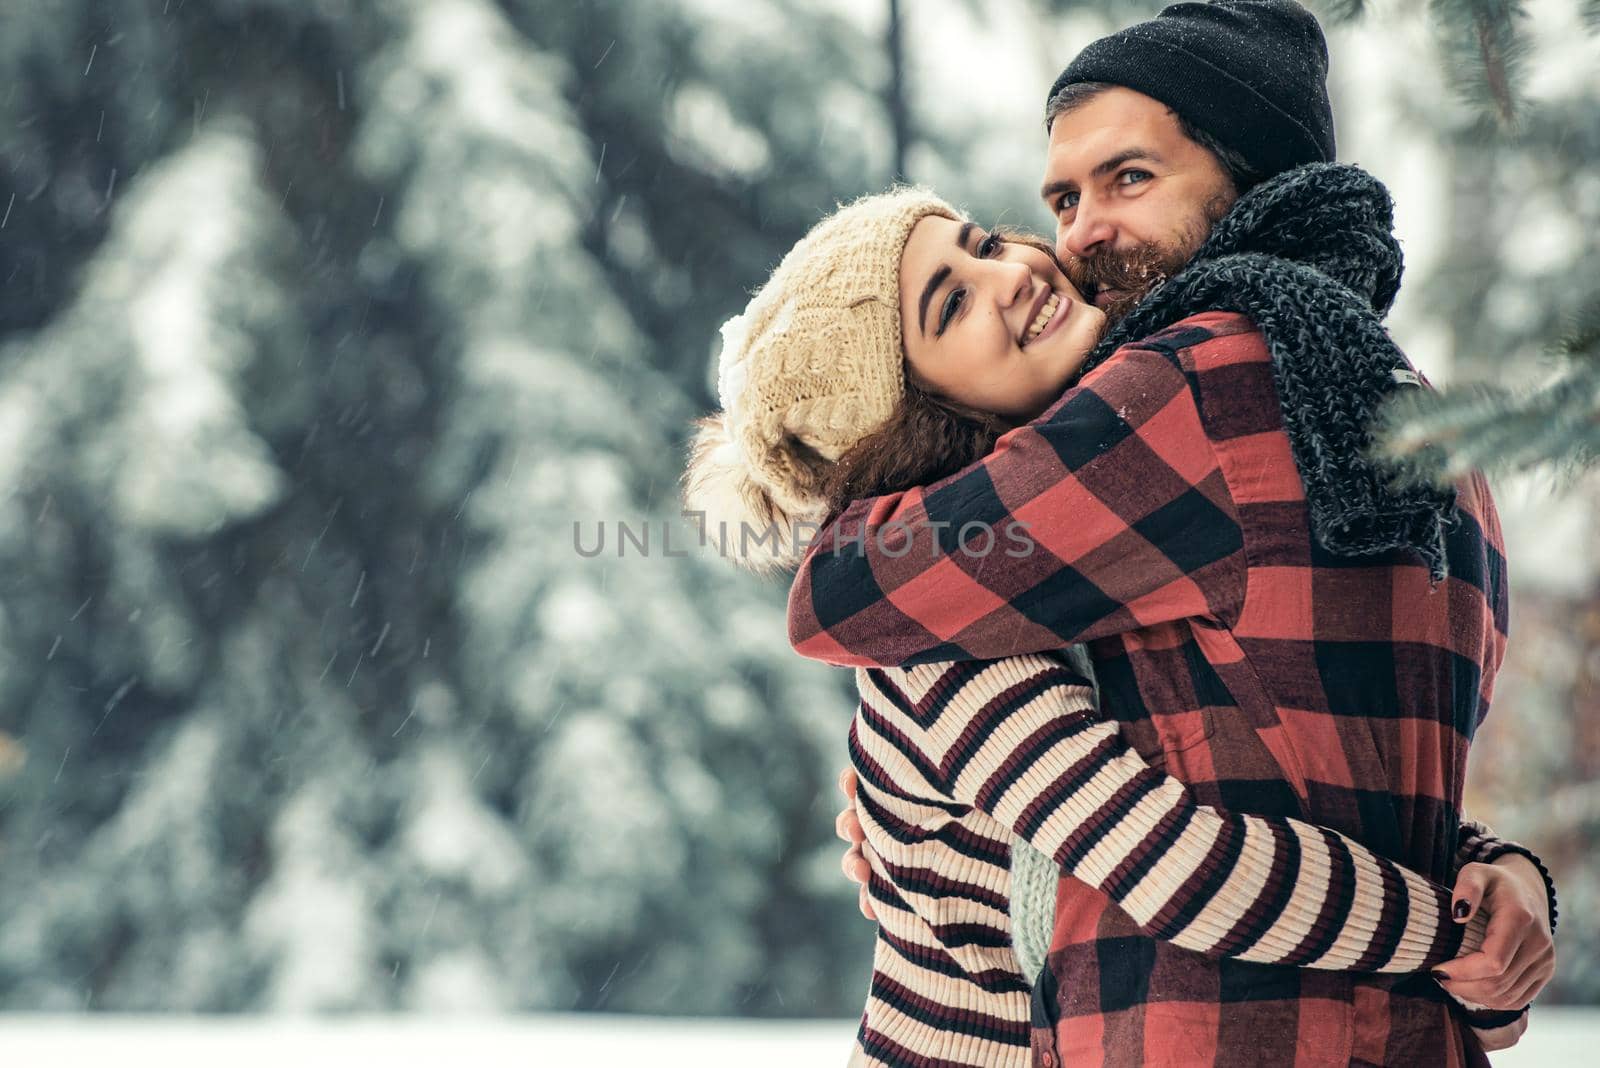 Winter happy couple in love embrace in snowy cold forest, winter holiday love and relations